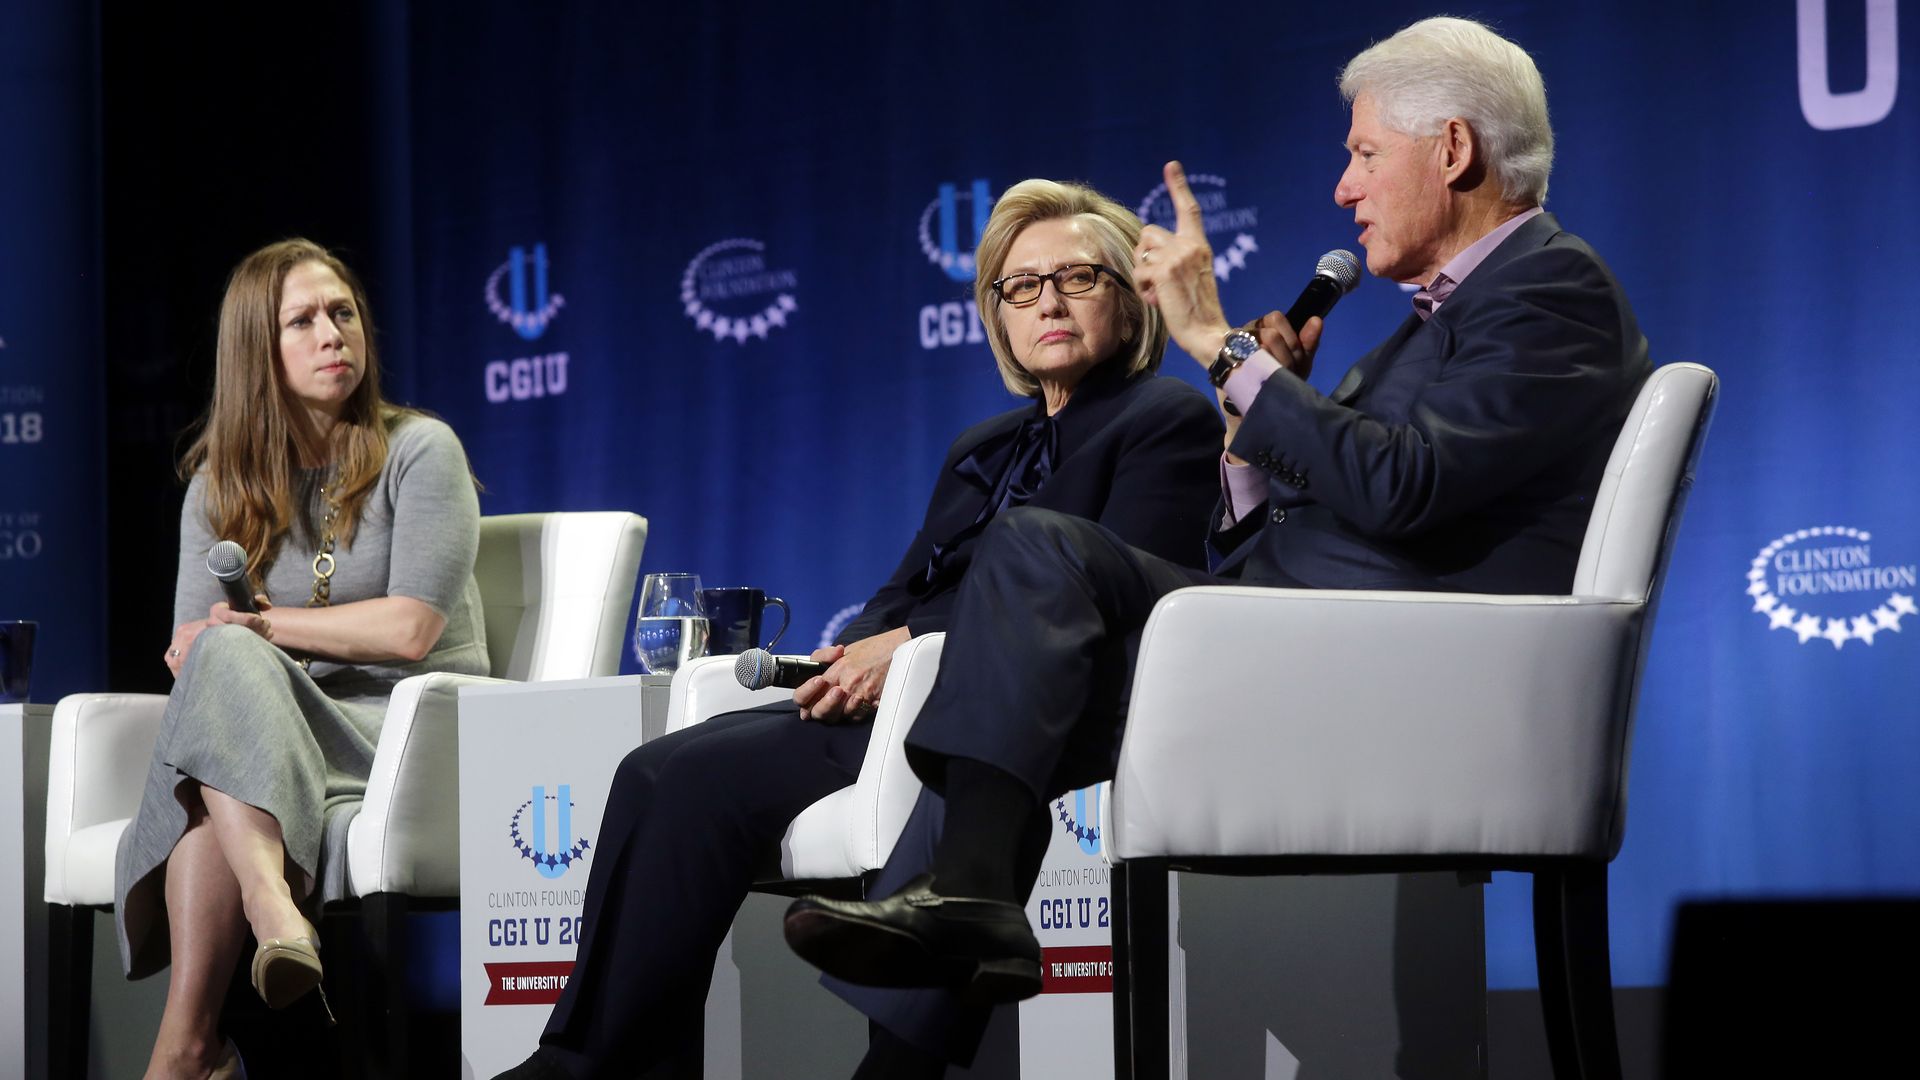 Clinton Foundation donations have plummeted 75% since Hillary lost to Trump in 2016